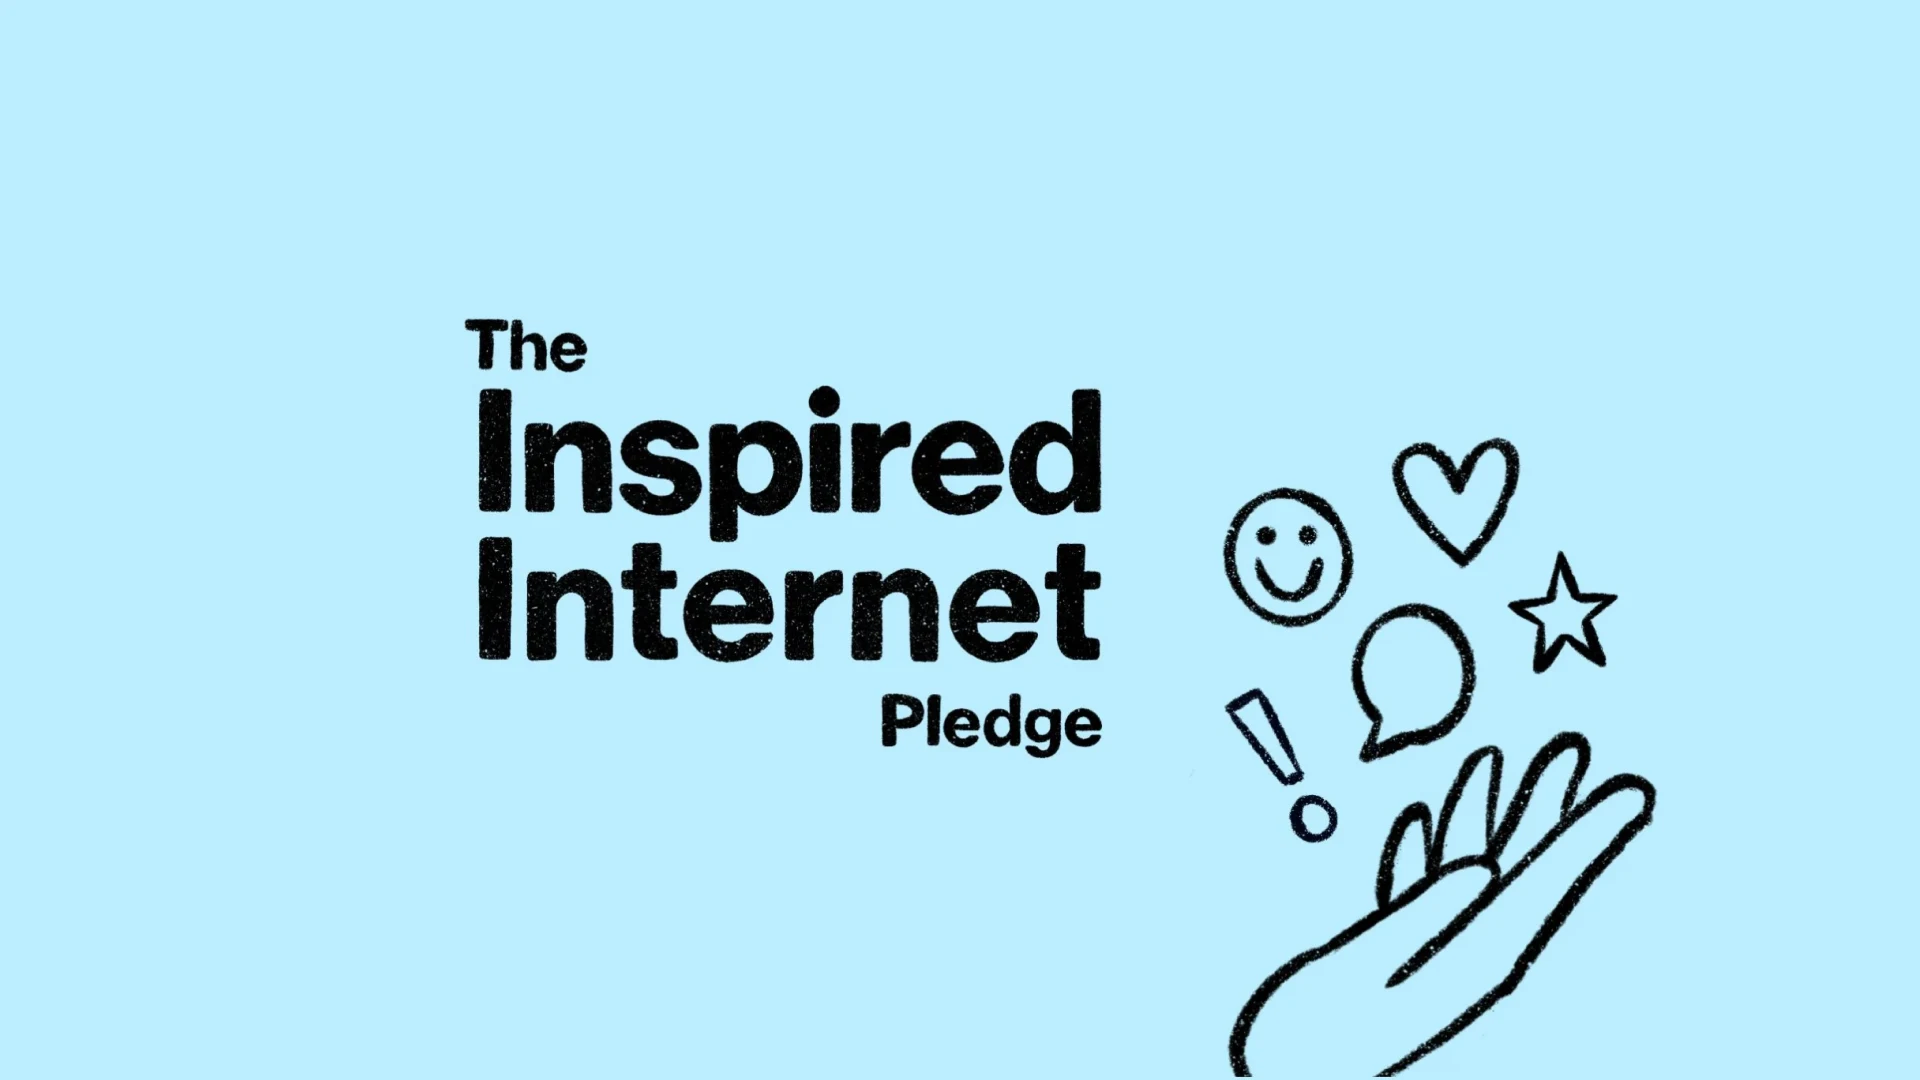 The words ‘The Inspired Internet Pledge’ are featured beside a drawing of a hand holding icons such as a heart, smiley face and star, on a blue background